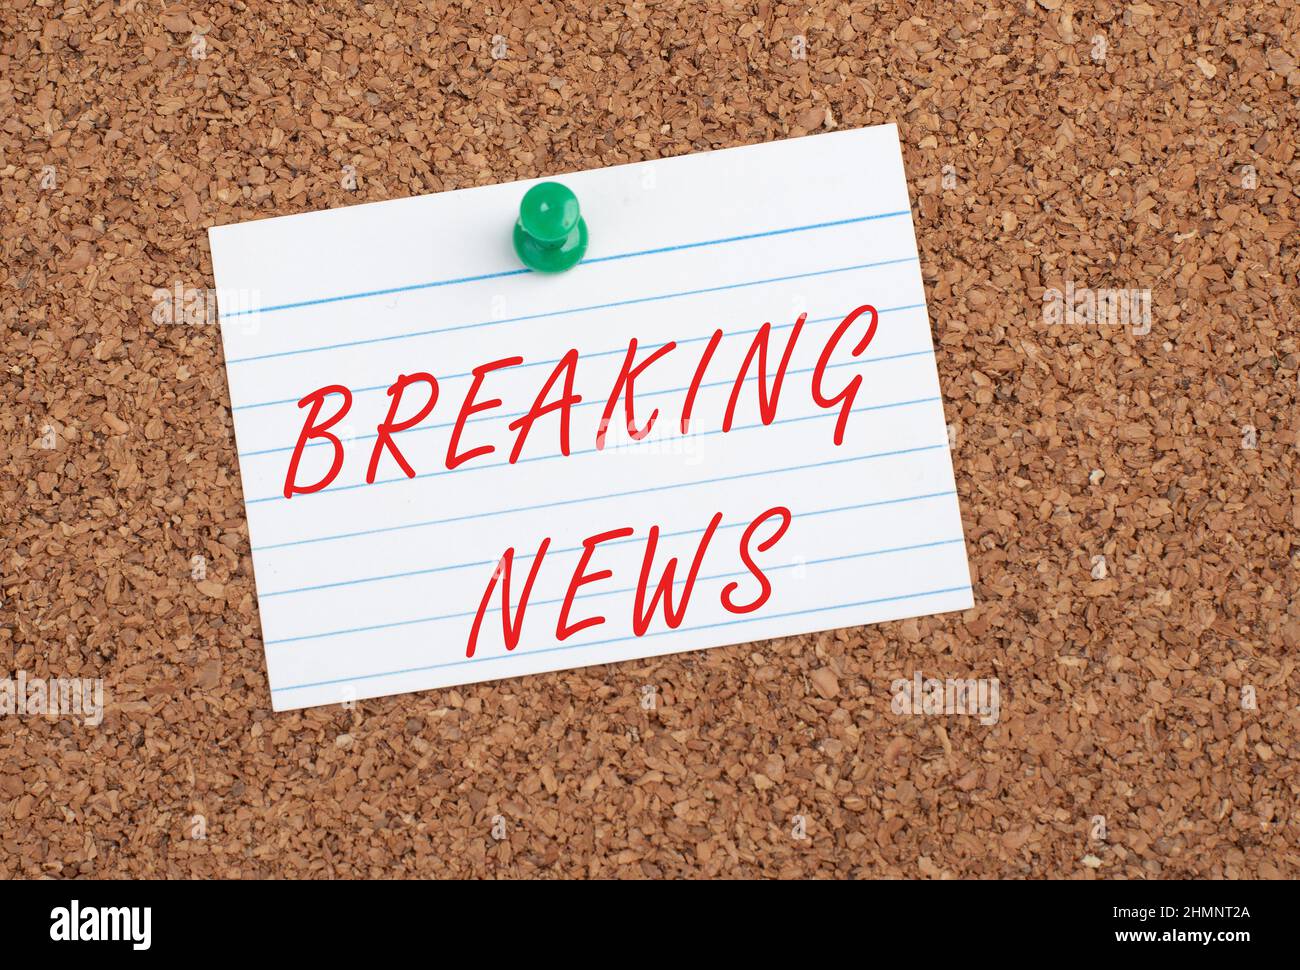 Breaking news is standing on a pinned paper, political message, time story, text Stock Photo